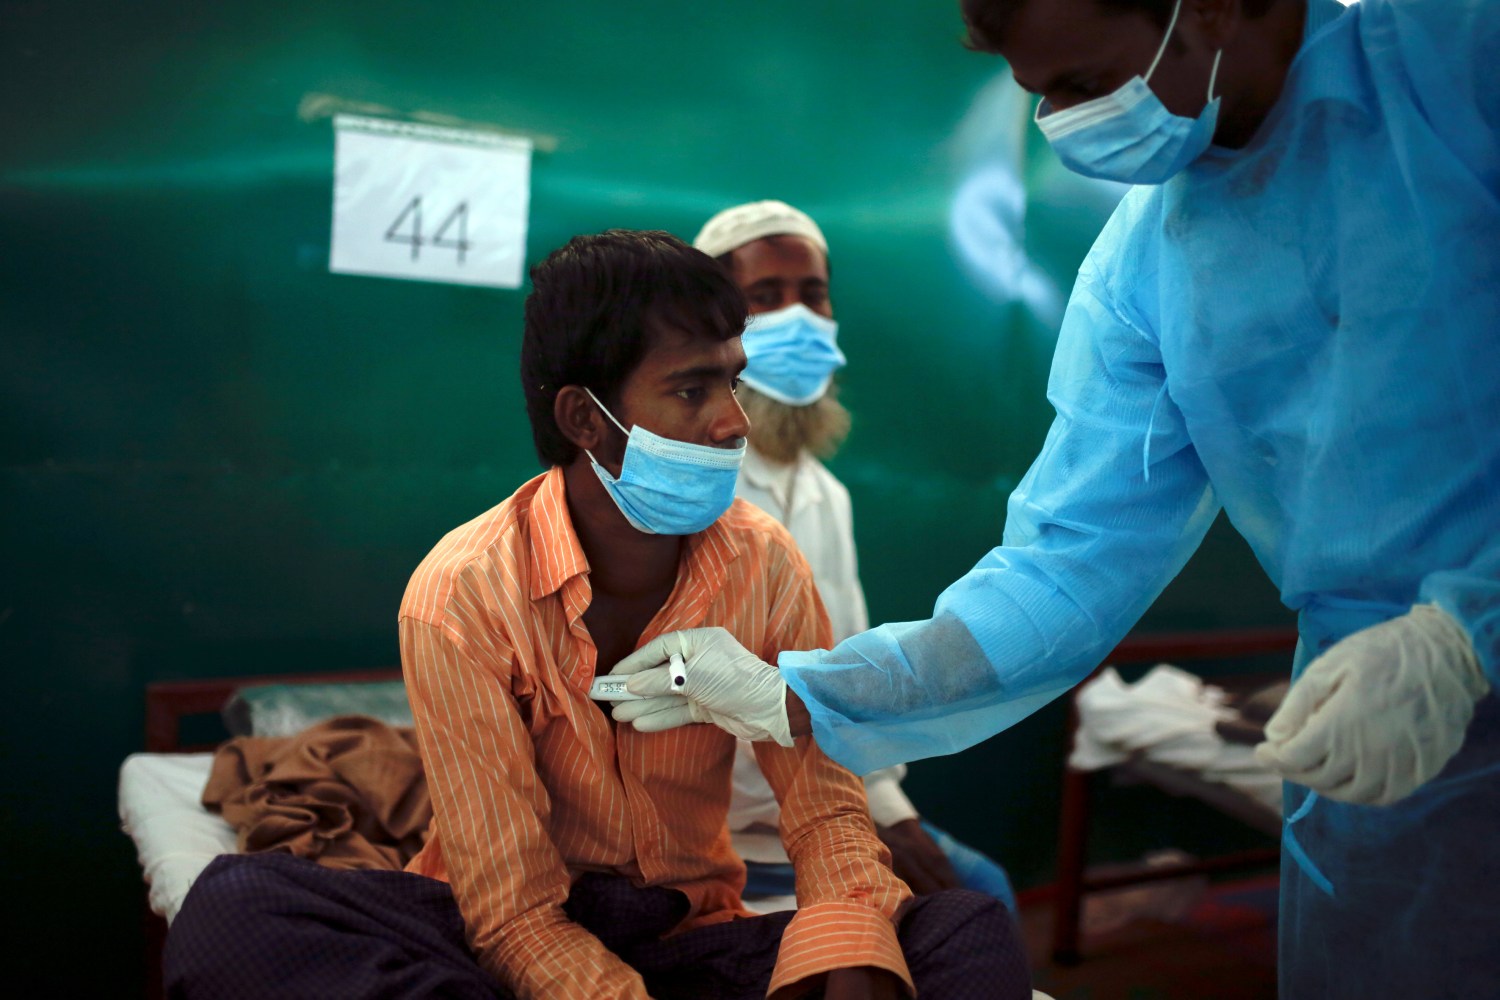 Rohingya refugee Nur Islam, 24, who suffers from diphtheria, is examined by a doctor at a Medecins Sans Frontieres (MSF) clinic near Cox's Bazar, Bangladesh December 18, 2017. According to the World Health Organisation (WHO) from November 3 through December 12, a total of 804 suspected diphtheria cases including 15 deaths were reported among the displaced Rohingya population in Cox's Bazar. REUTERS/Alkis Konstantinidis